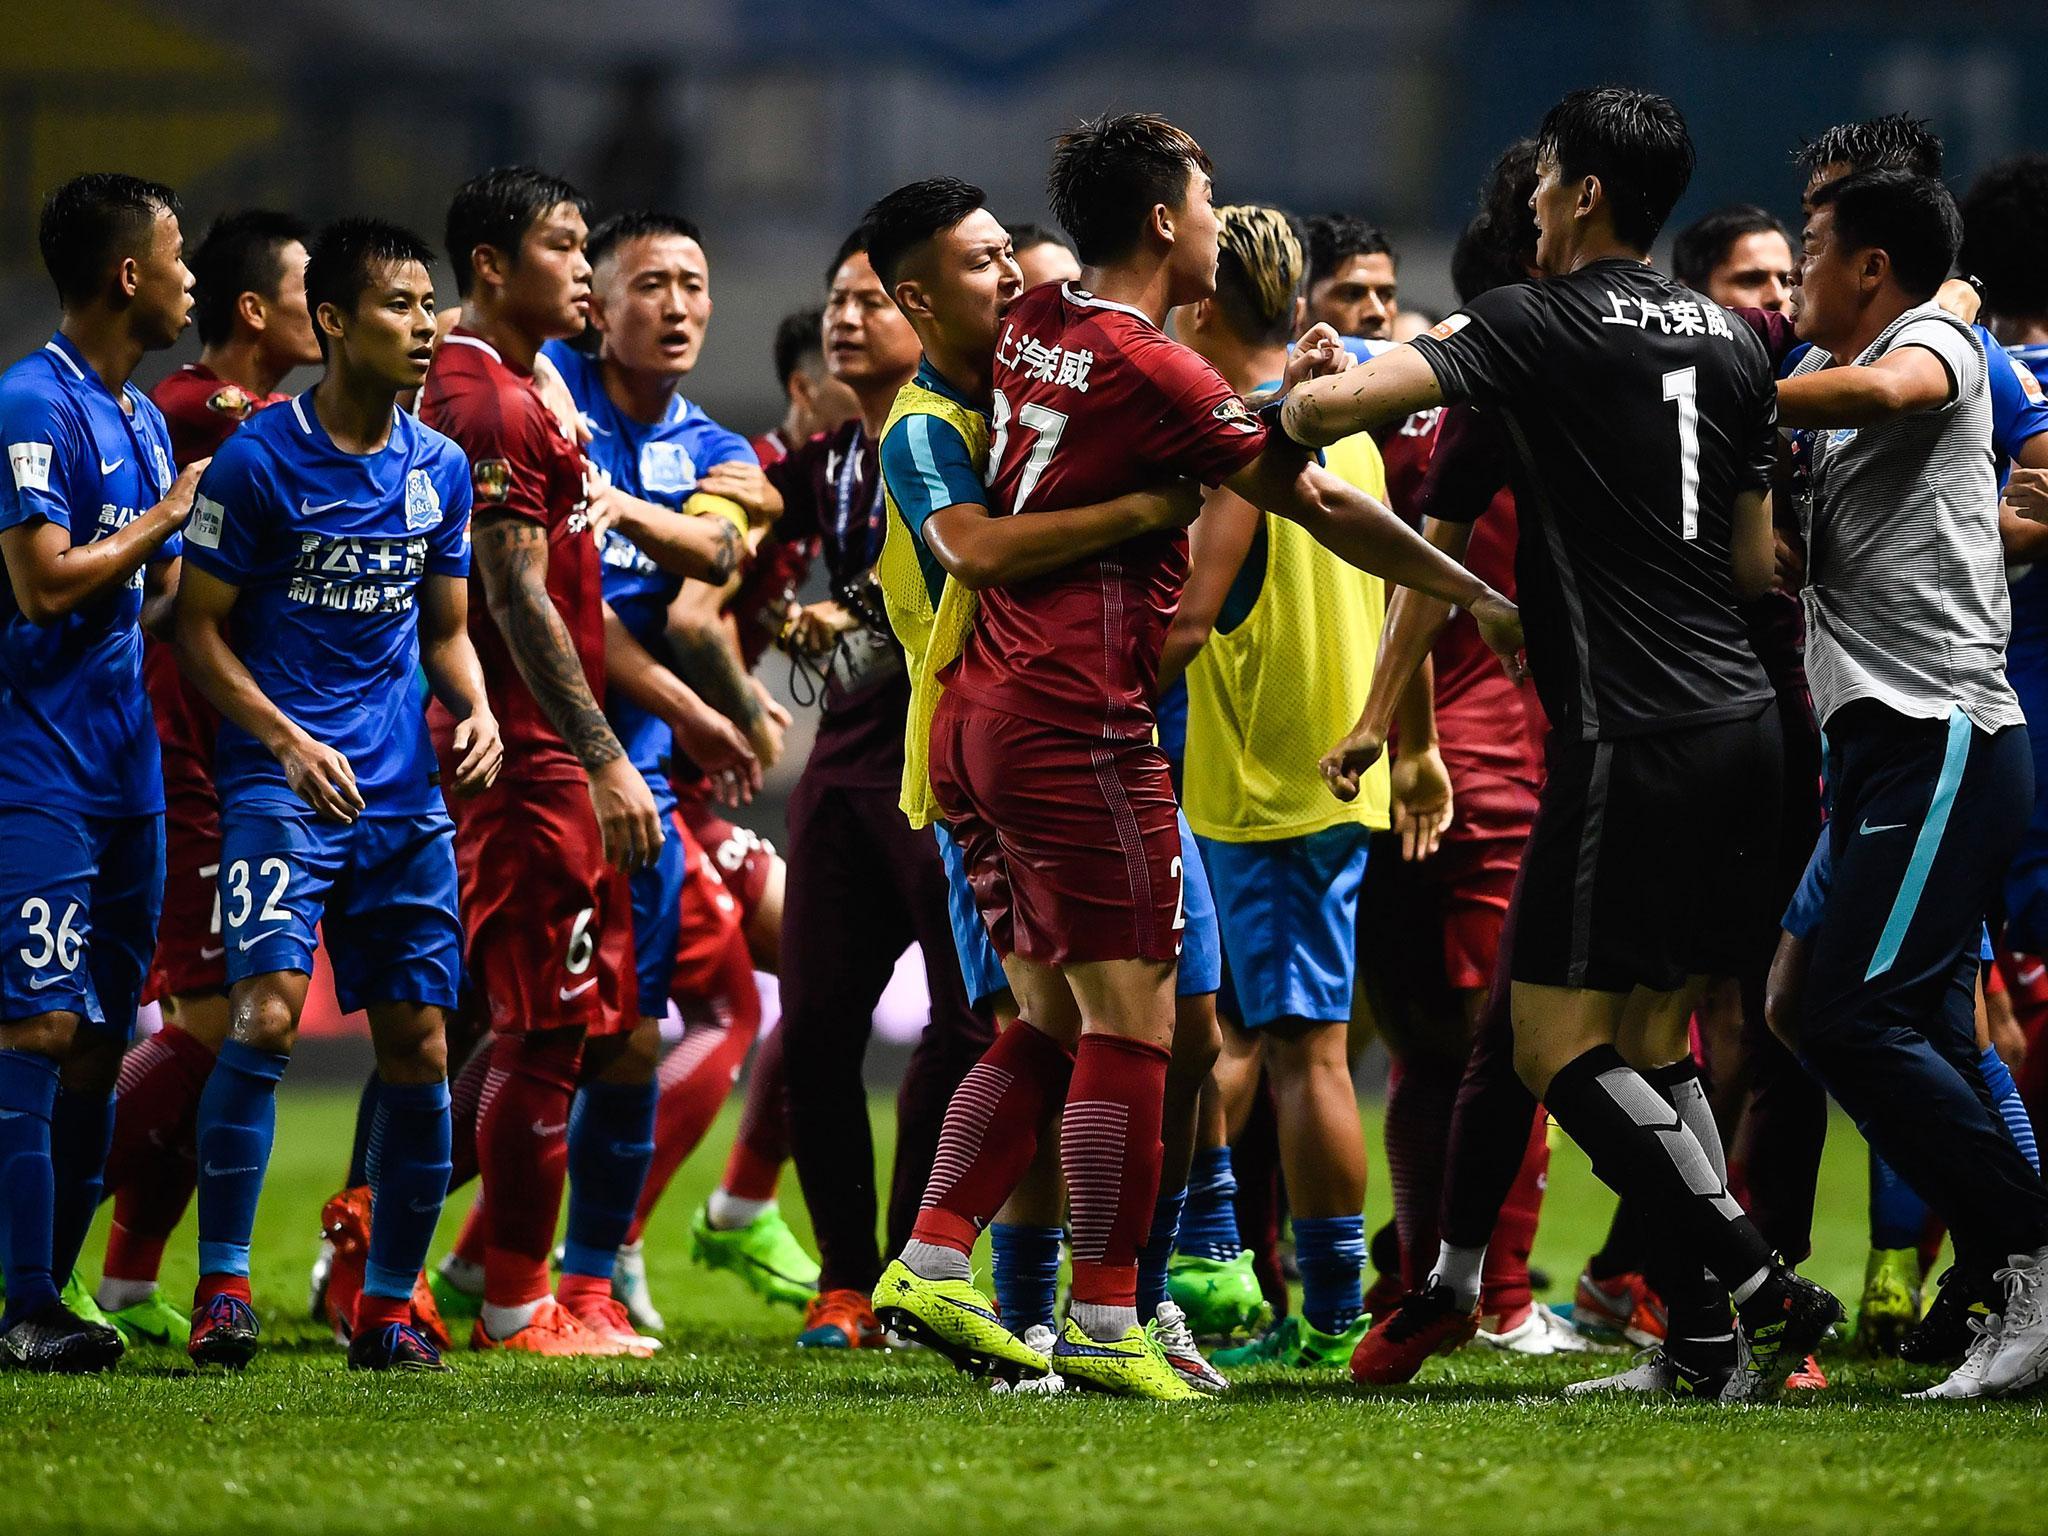 Oscar's actions sparked a mass melee just before half-time